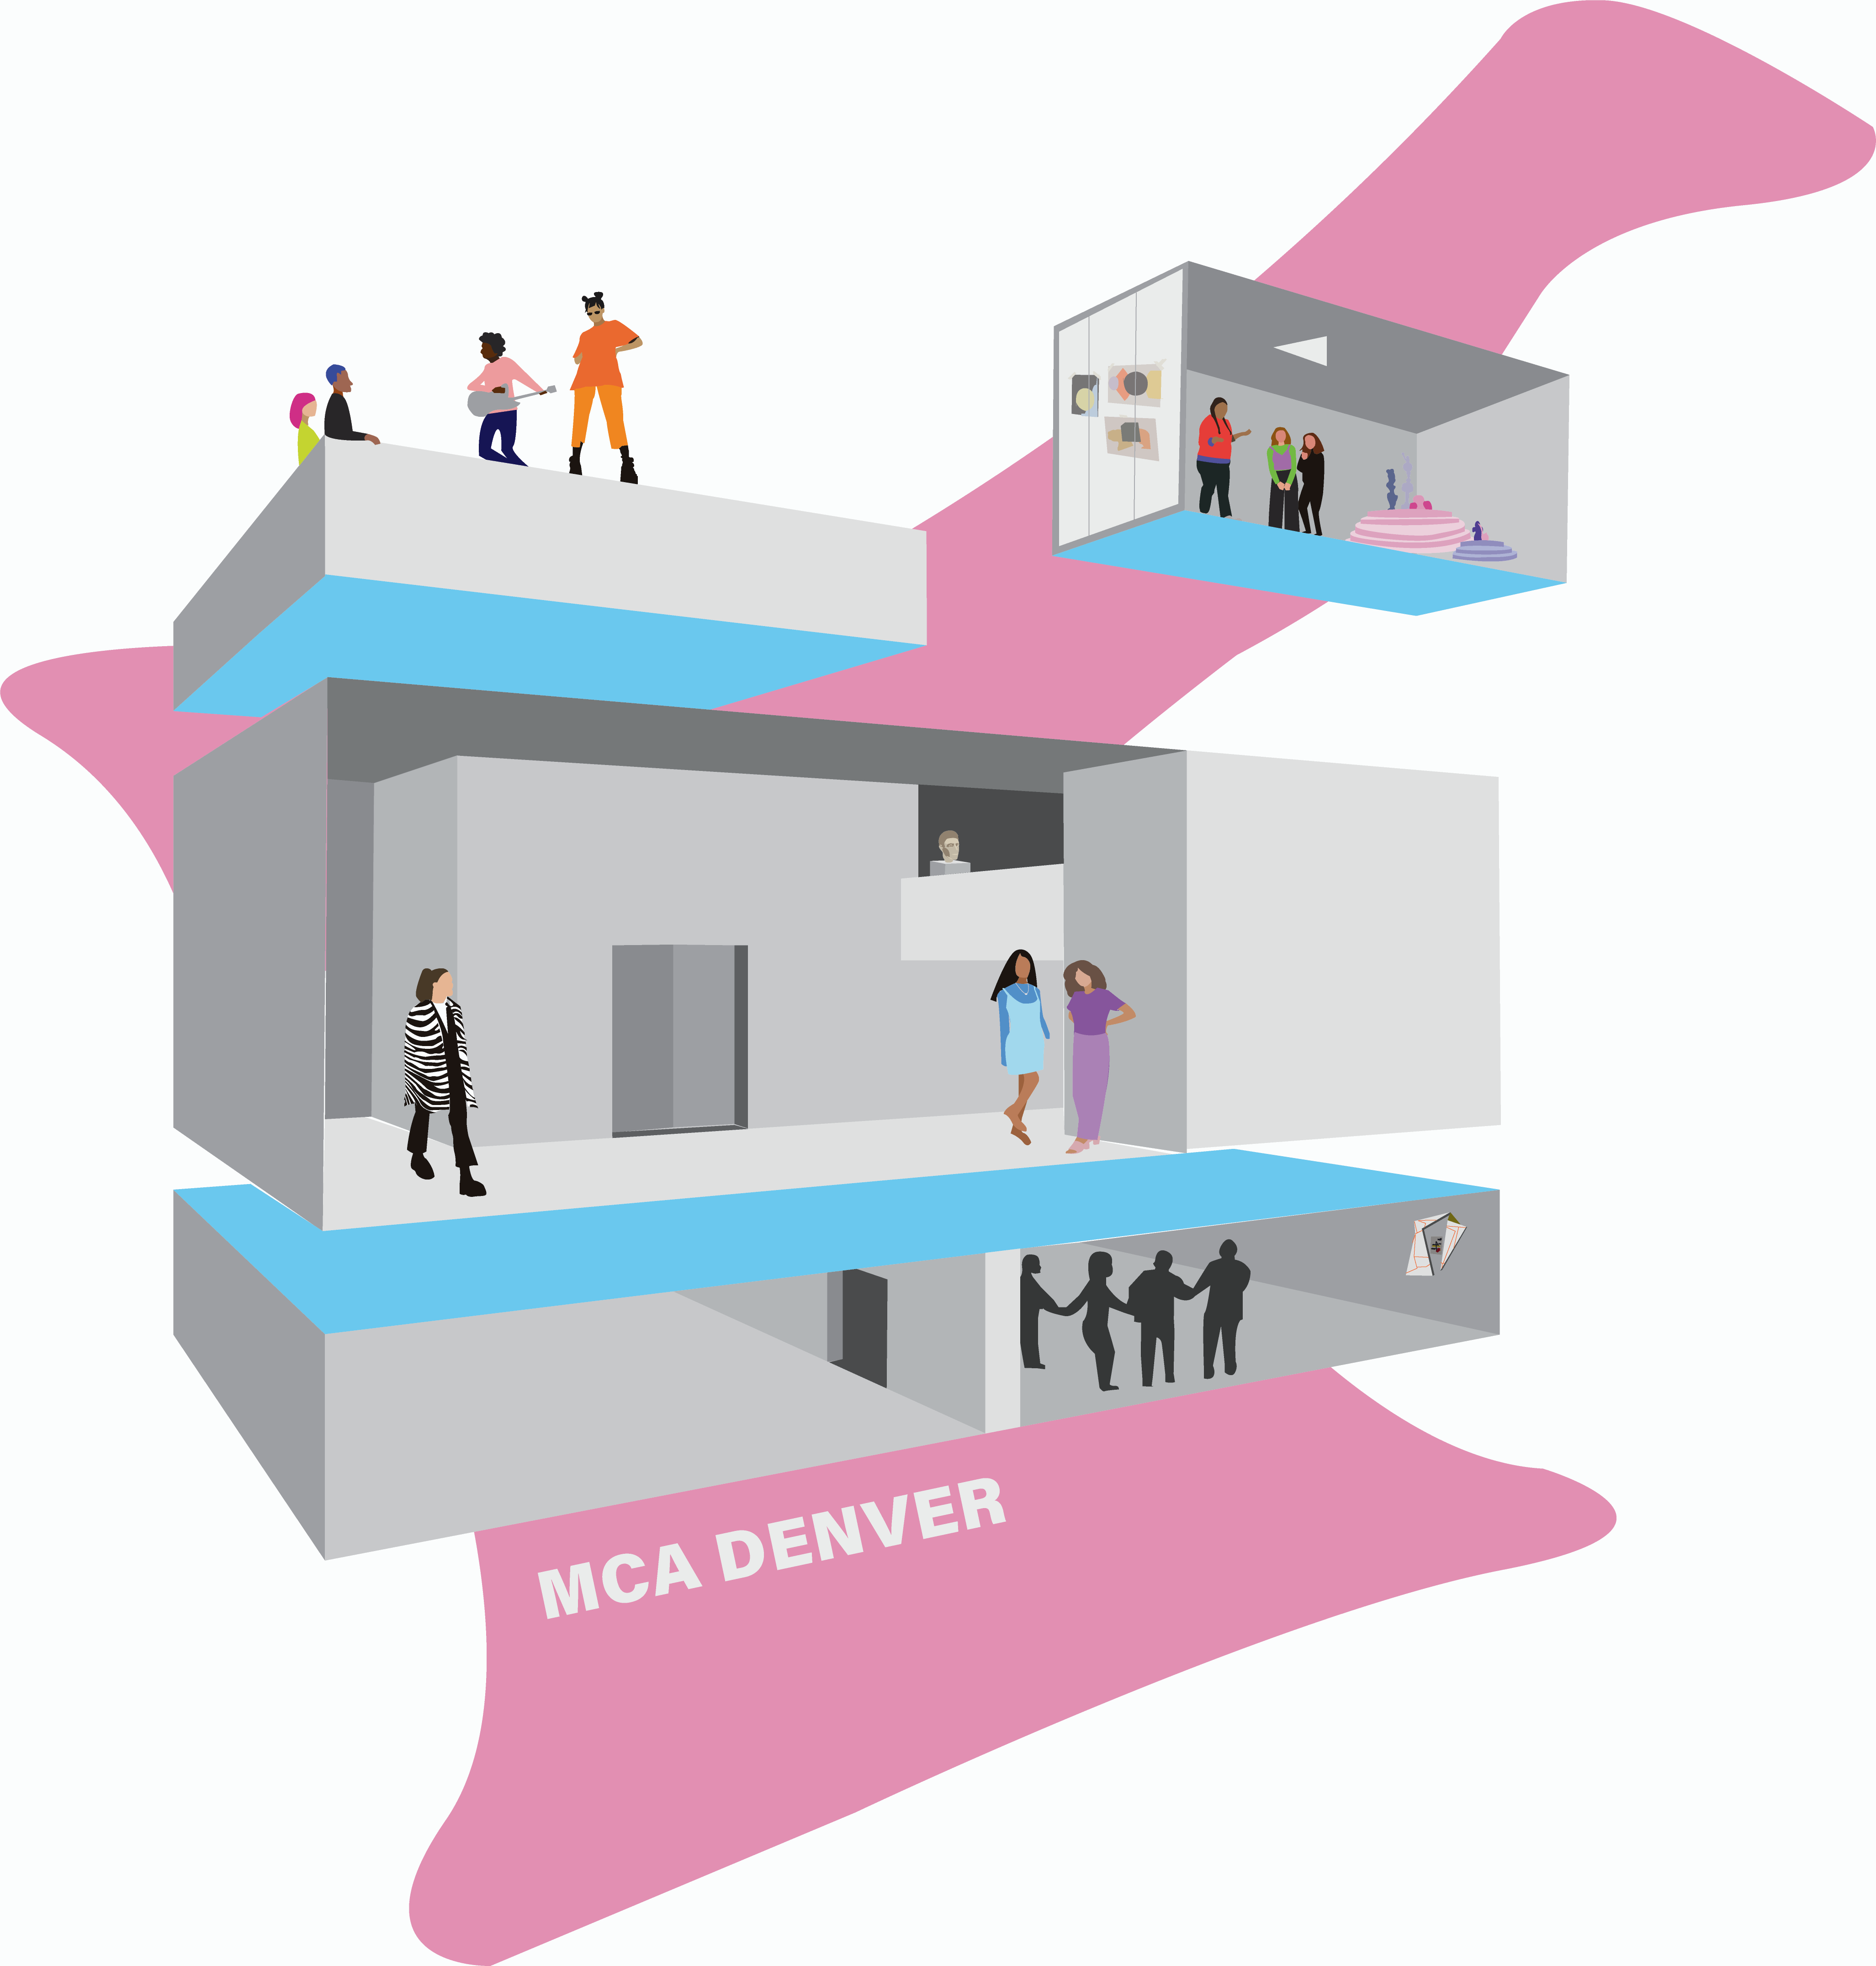 An abstraction of the MCA building, filled with the people who make MCA special. The collage-like style mimics the explorative energy of MCA. Behind the abstraction of the building is an abstract pink shape. 